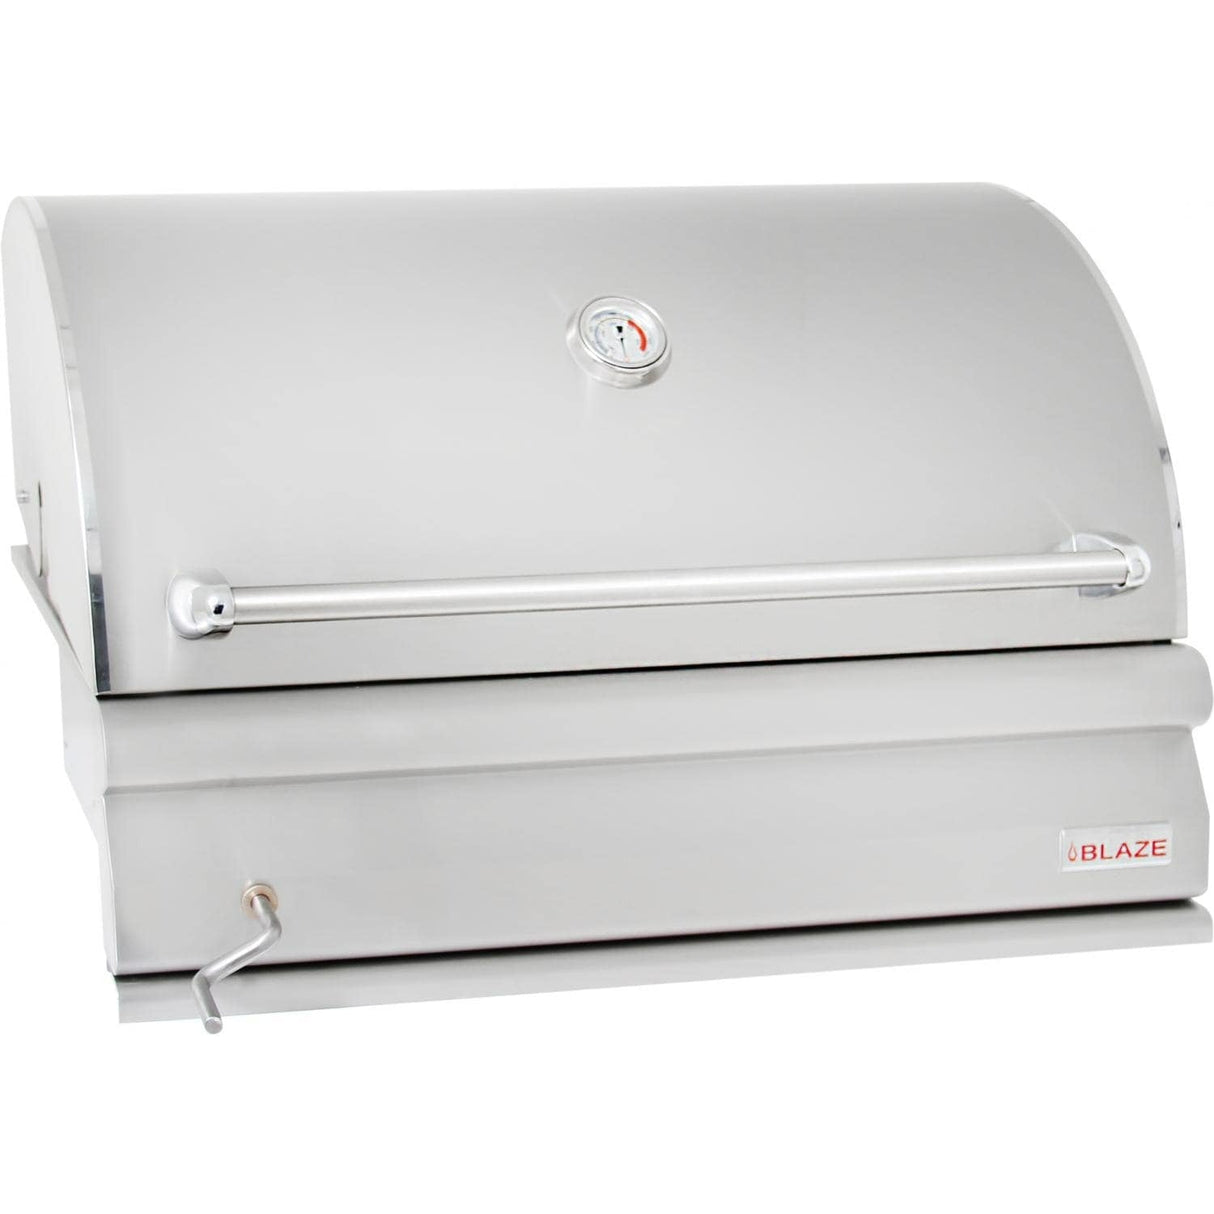 Blaze 32-Inch Built-In Stainless Steel Charcoal Grill With Adjustable Charcoal Tray